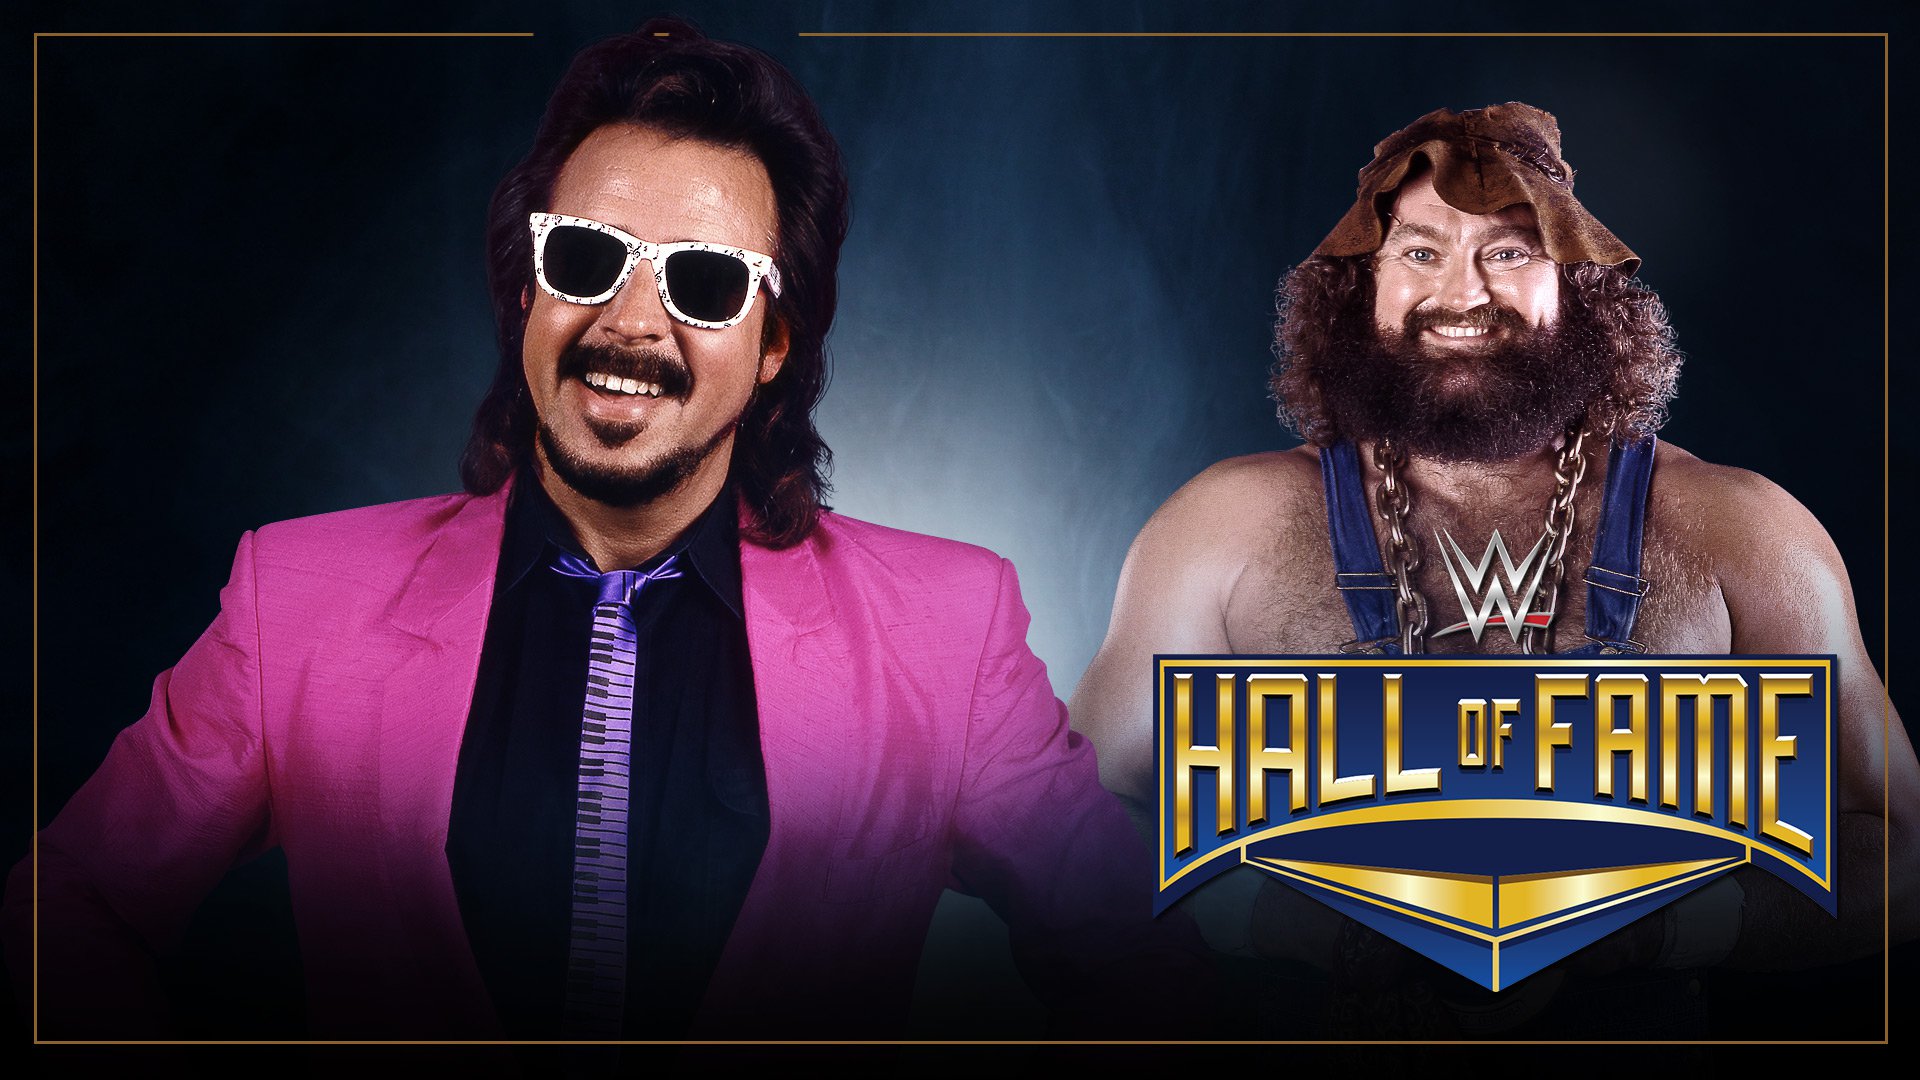 Jimmy Hart to induct Hillbilly Jim into the WWE Hall of Fame